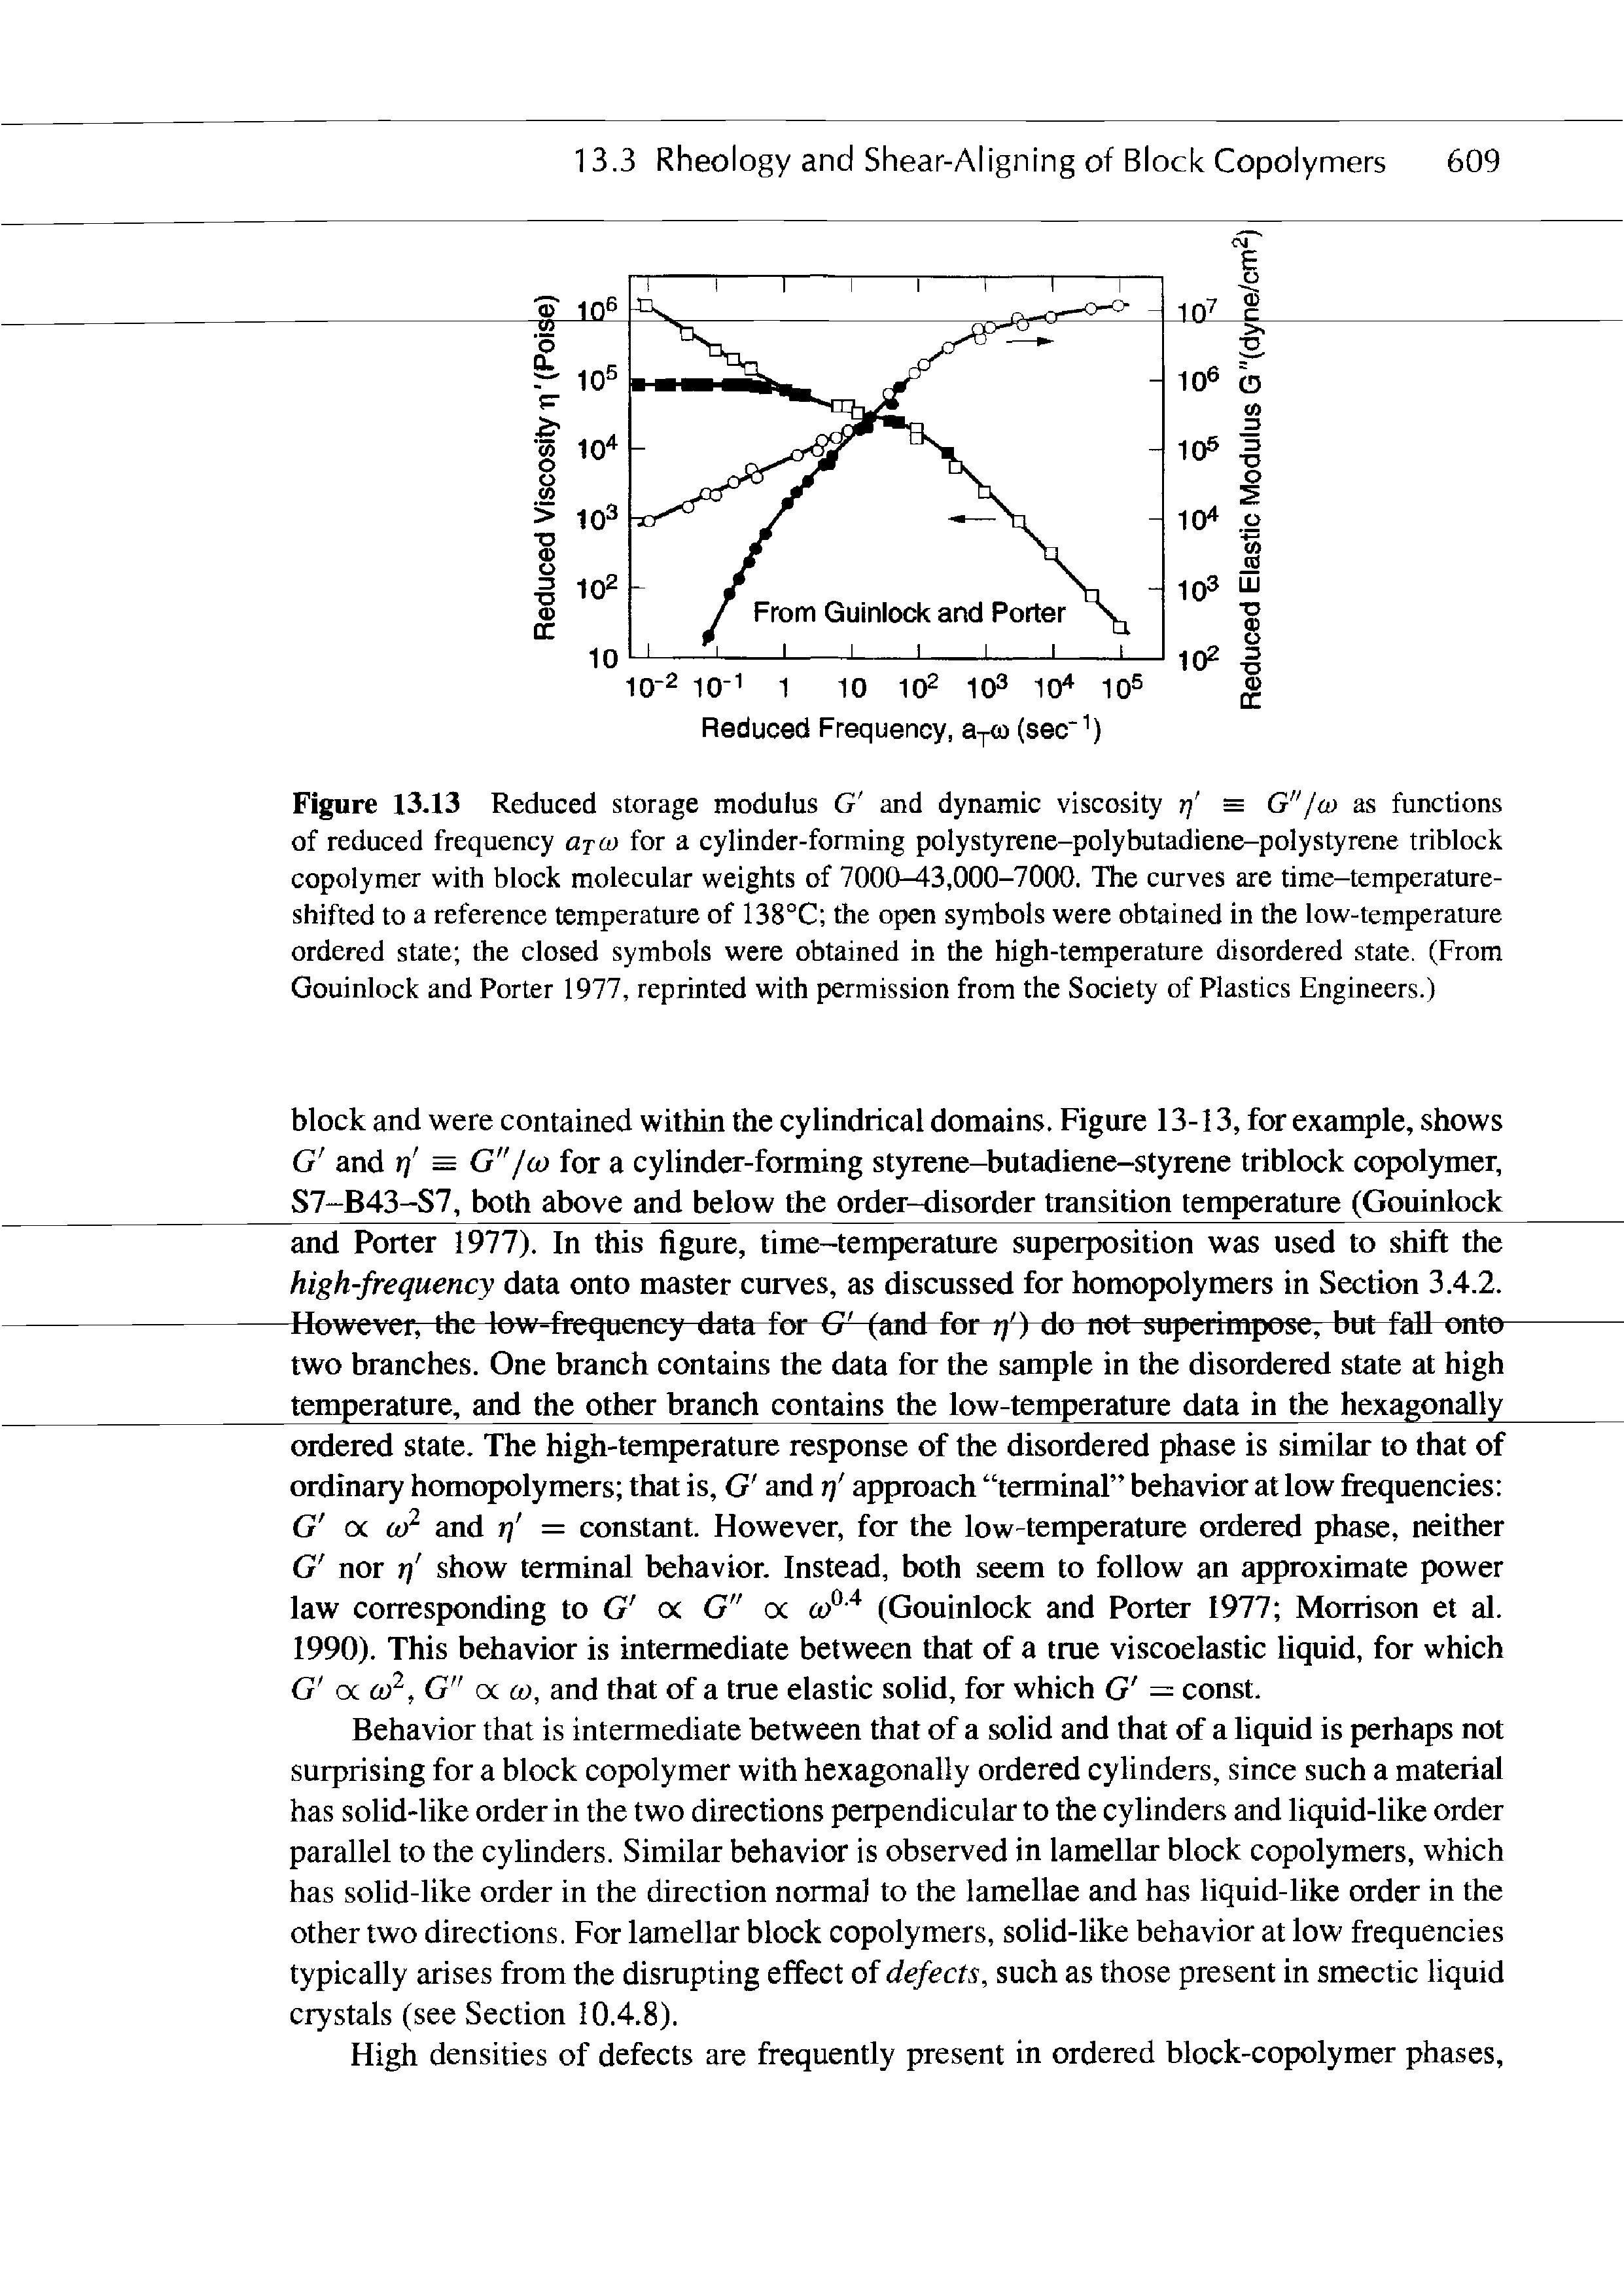 Figure 13.13 Reduced storage modulus G and dynamic viscosity rj = G /w as functions of reduced frequency uto) for a cylinder-forming polystyrene-polybutadiene-polystyrene triblock copolymer with block molecular weights of 7000-43,000-7000. The curves are time-temperature-shifted to a reference temperature of 138°C the open symbols were obtained in the low-temperature ordered state the closed symbols were obtained in the high-temperature disordered state. (From Gouinlock and Porter 1977, reprinted with permission from the Society of Plastics Engineers.)...